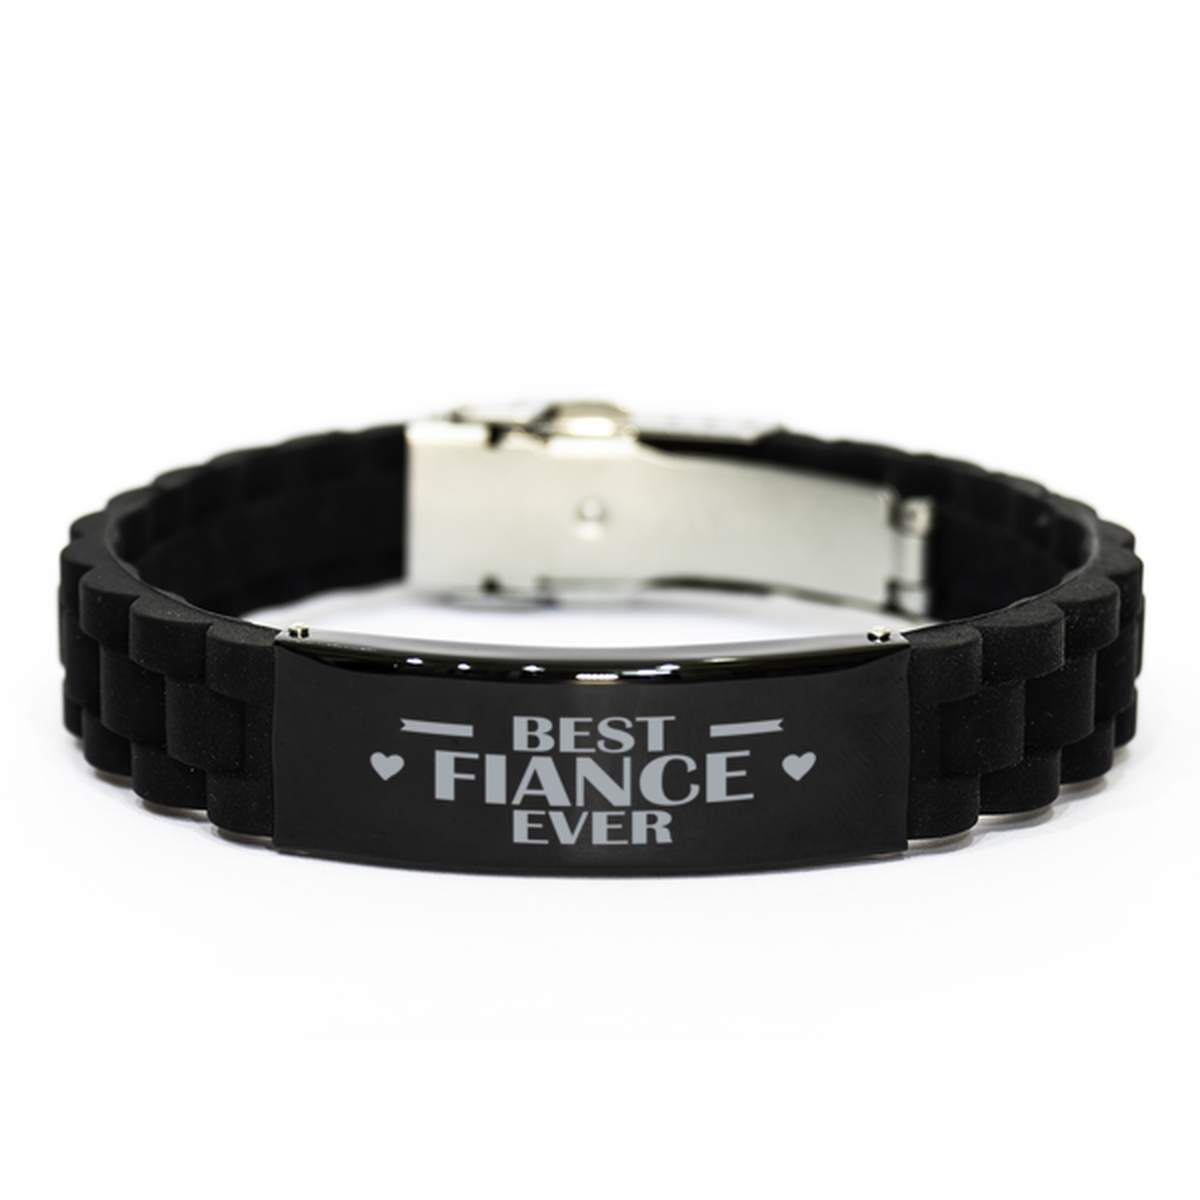 Best Fiance Ever Fiance Gifts, Funny Black Engraved Bracelet For Fiance, Family Gifts For Men